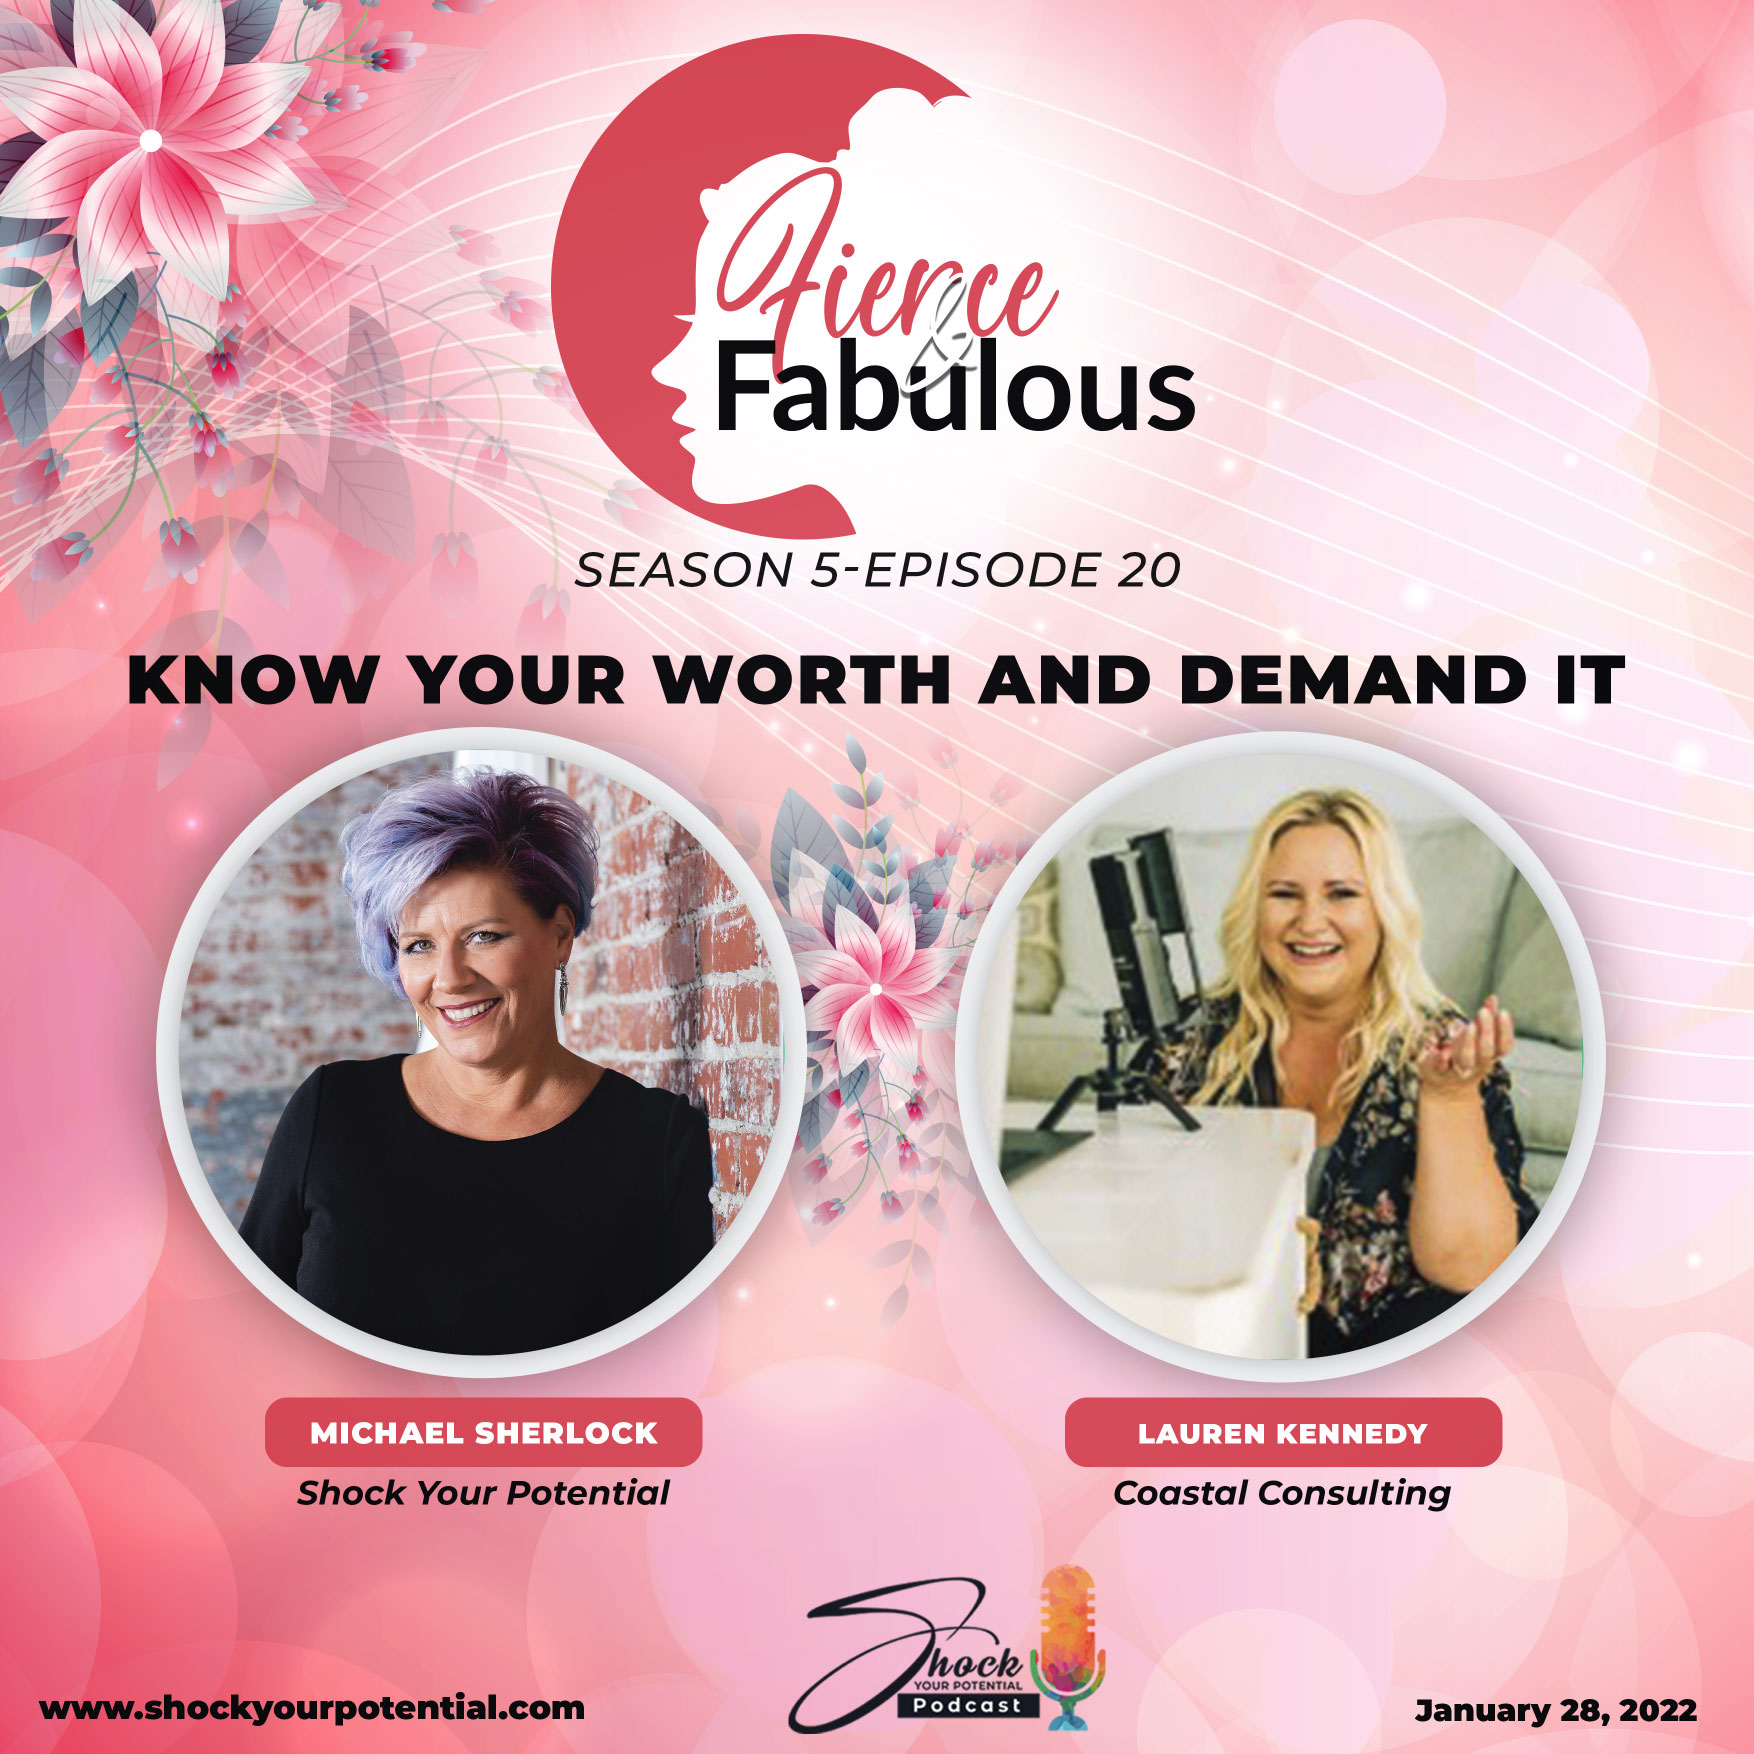 Know Your Worth and Demand It – Lauren Kennedy